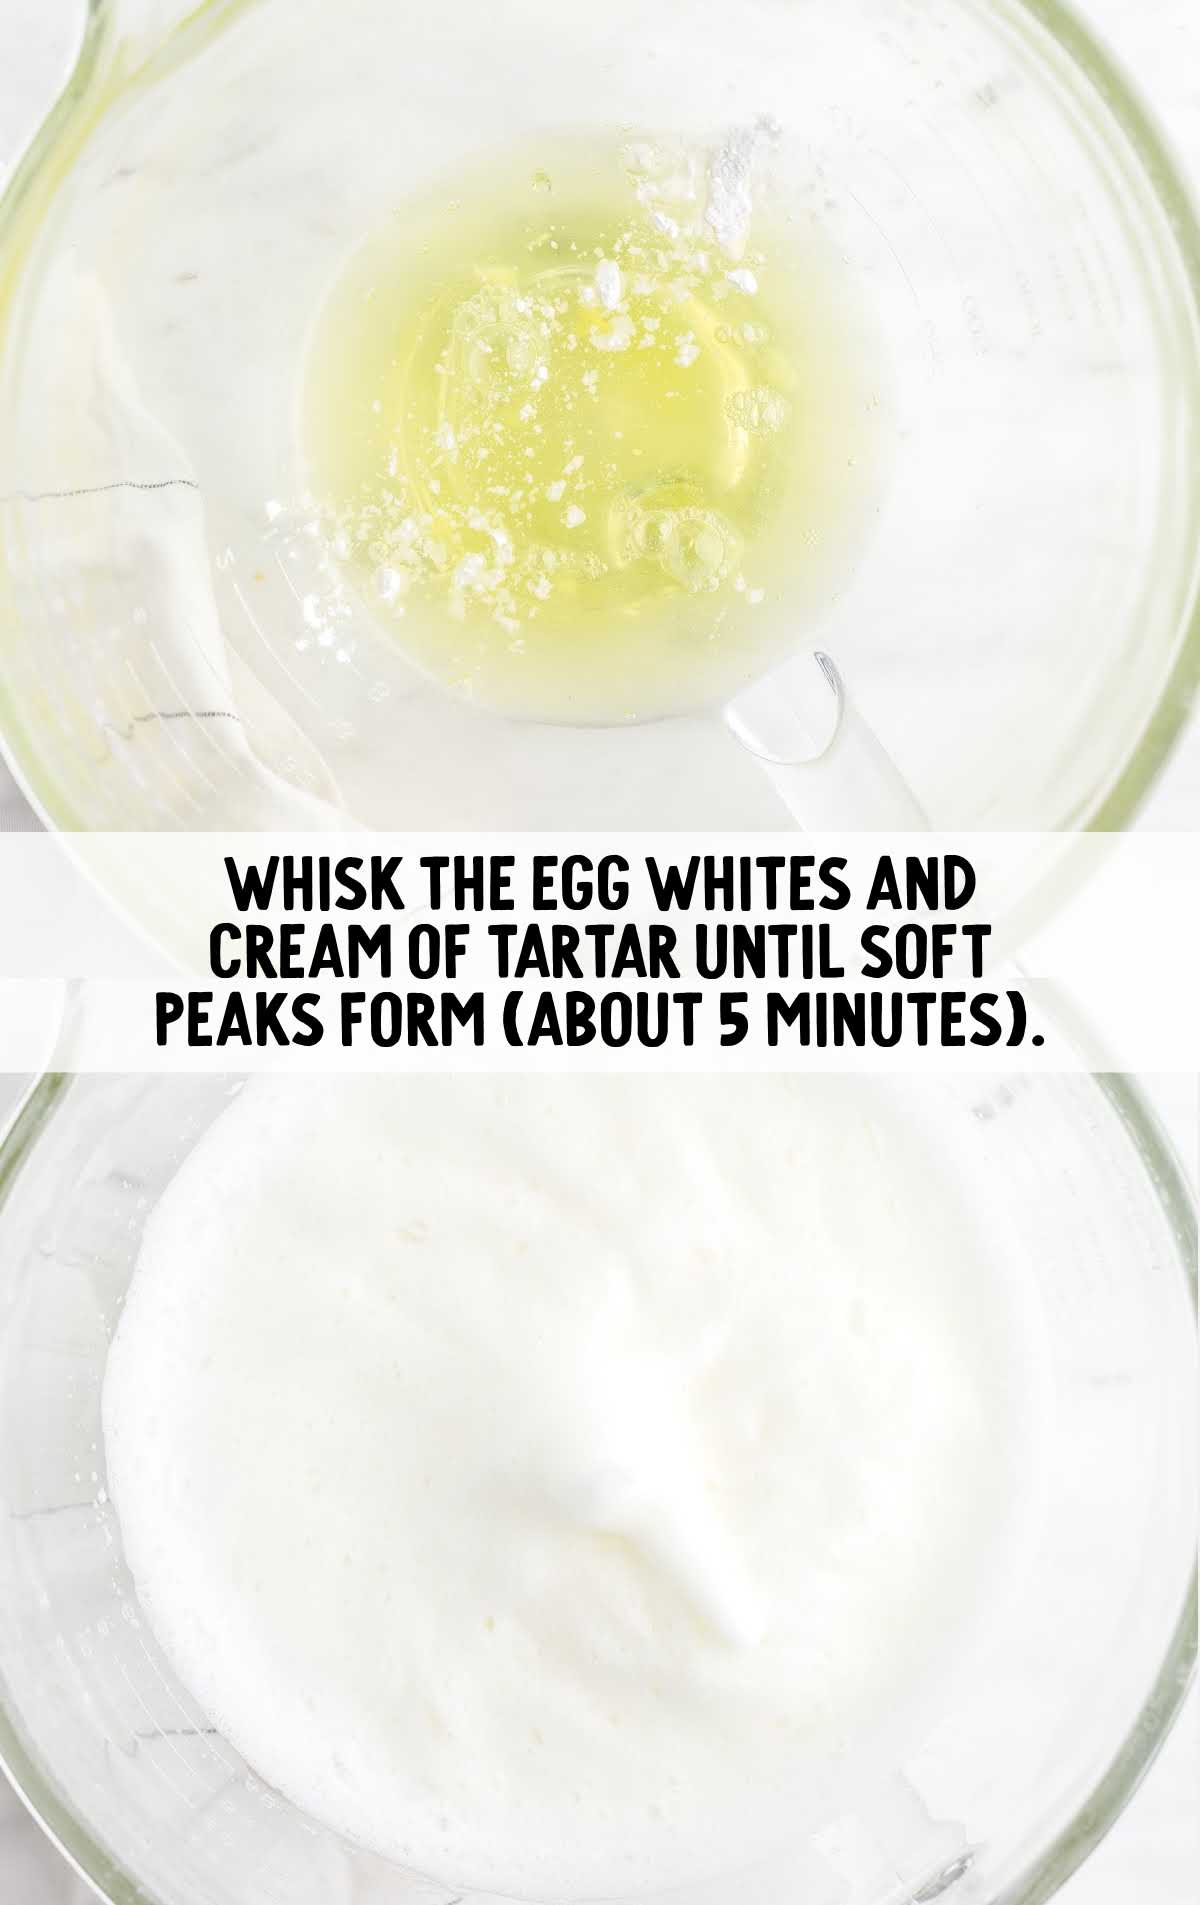 eggs whites and cream of tartar whisked in a bowl